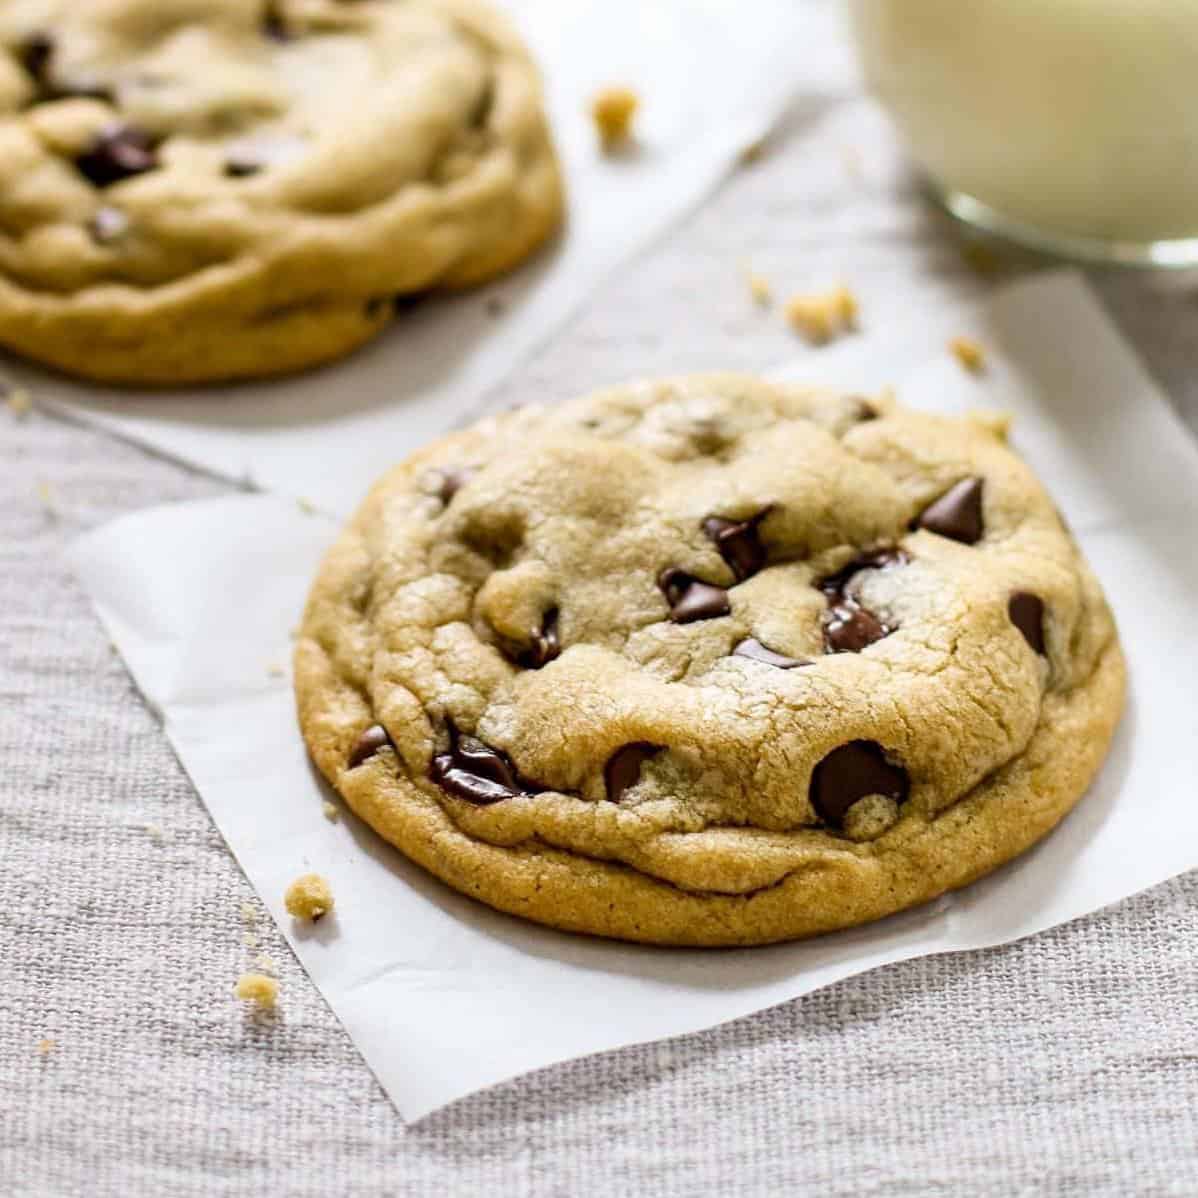  You can never go wrong with chocolate chips!